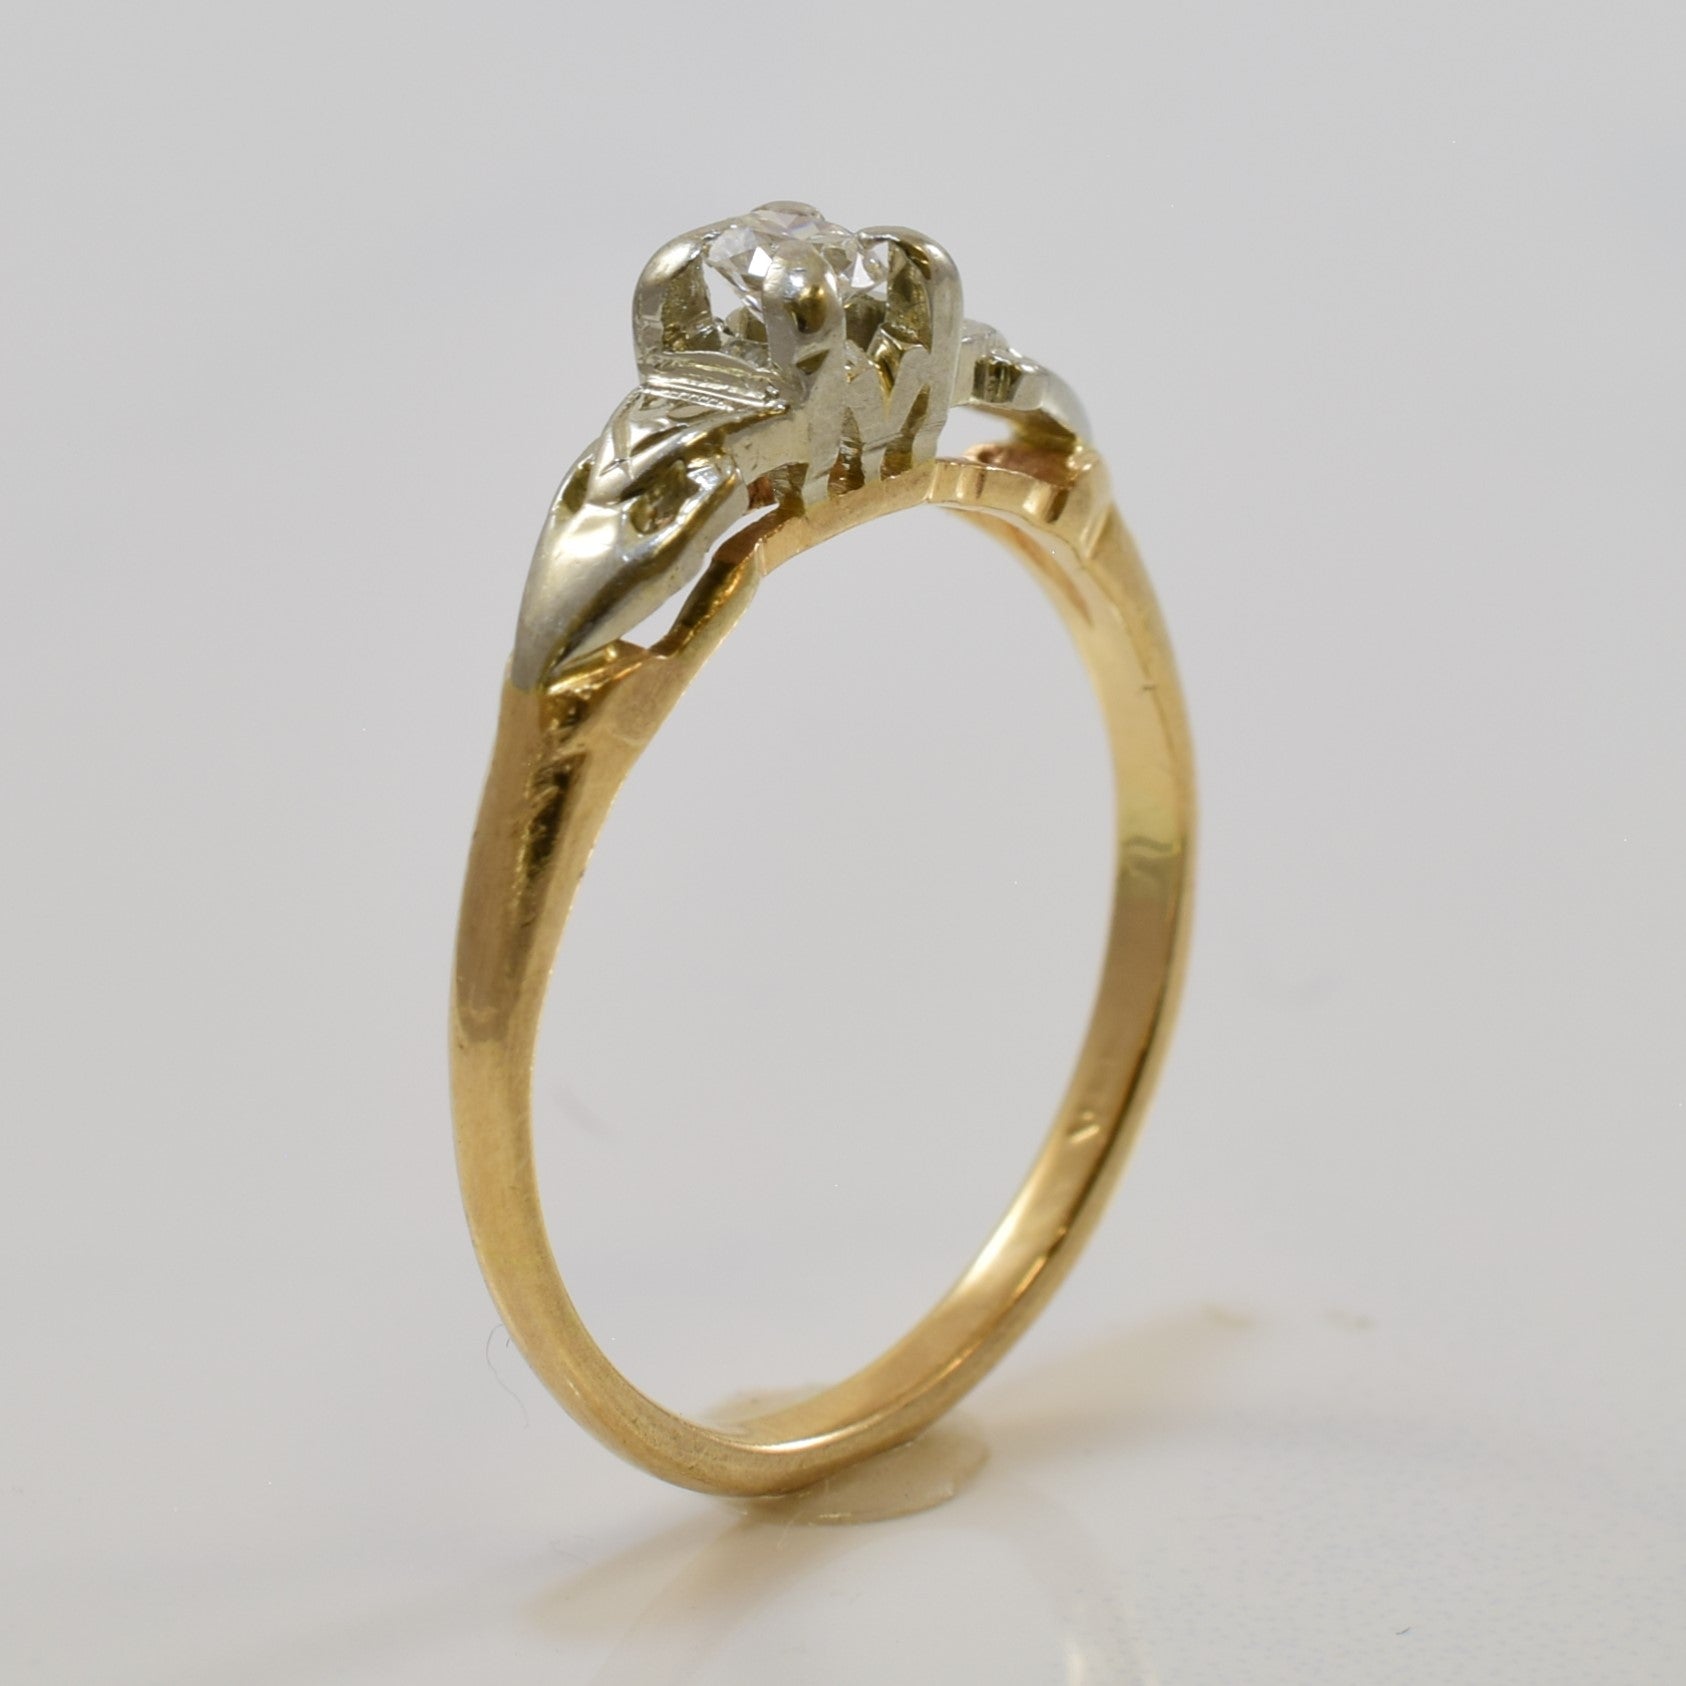 Early 1930s Solitaire Diamond Ring | 0.12ct | SZ 6 |